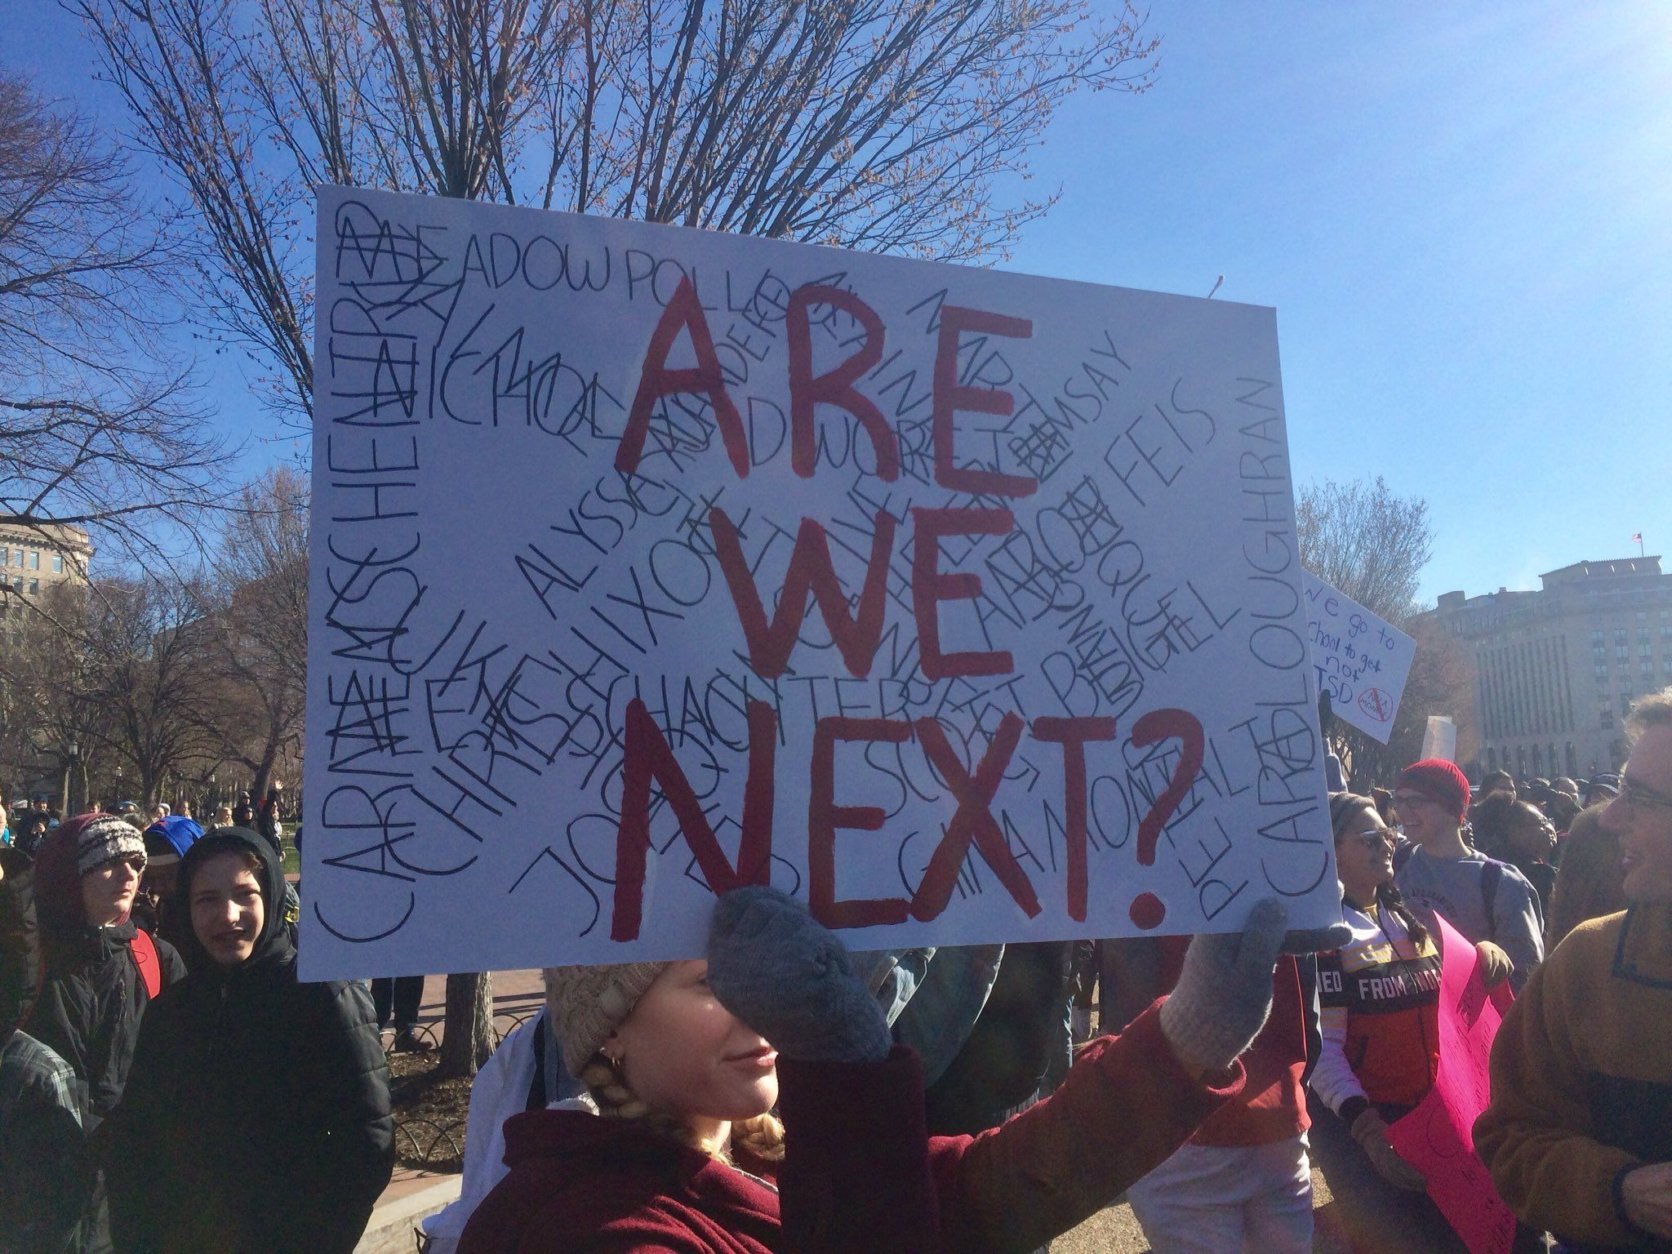 “We’re tired of seeing children die,” said one protester at the silent gun control rally outside the White House. (WTOP/Nick Iannelli)